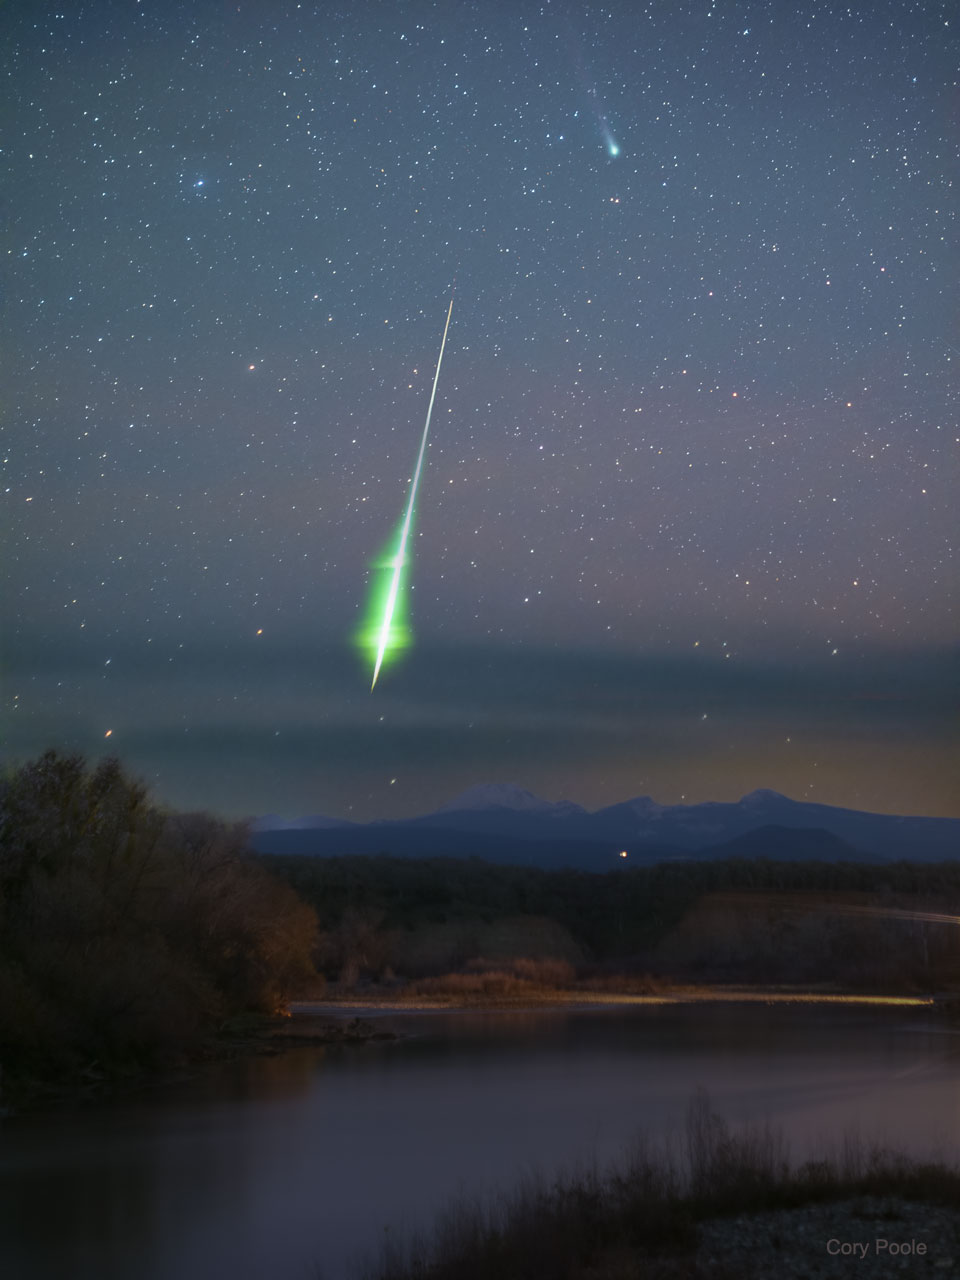 The Comet and the Fireball